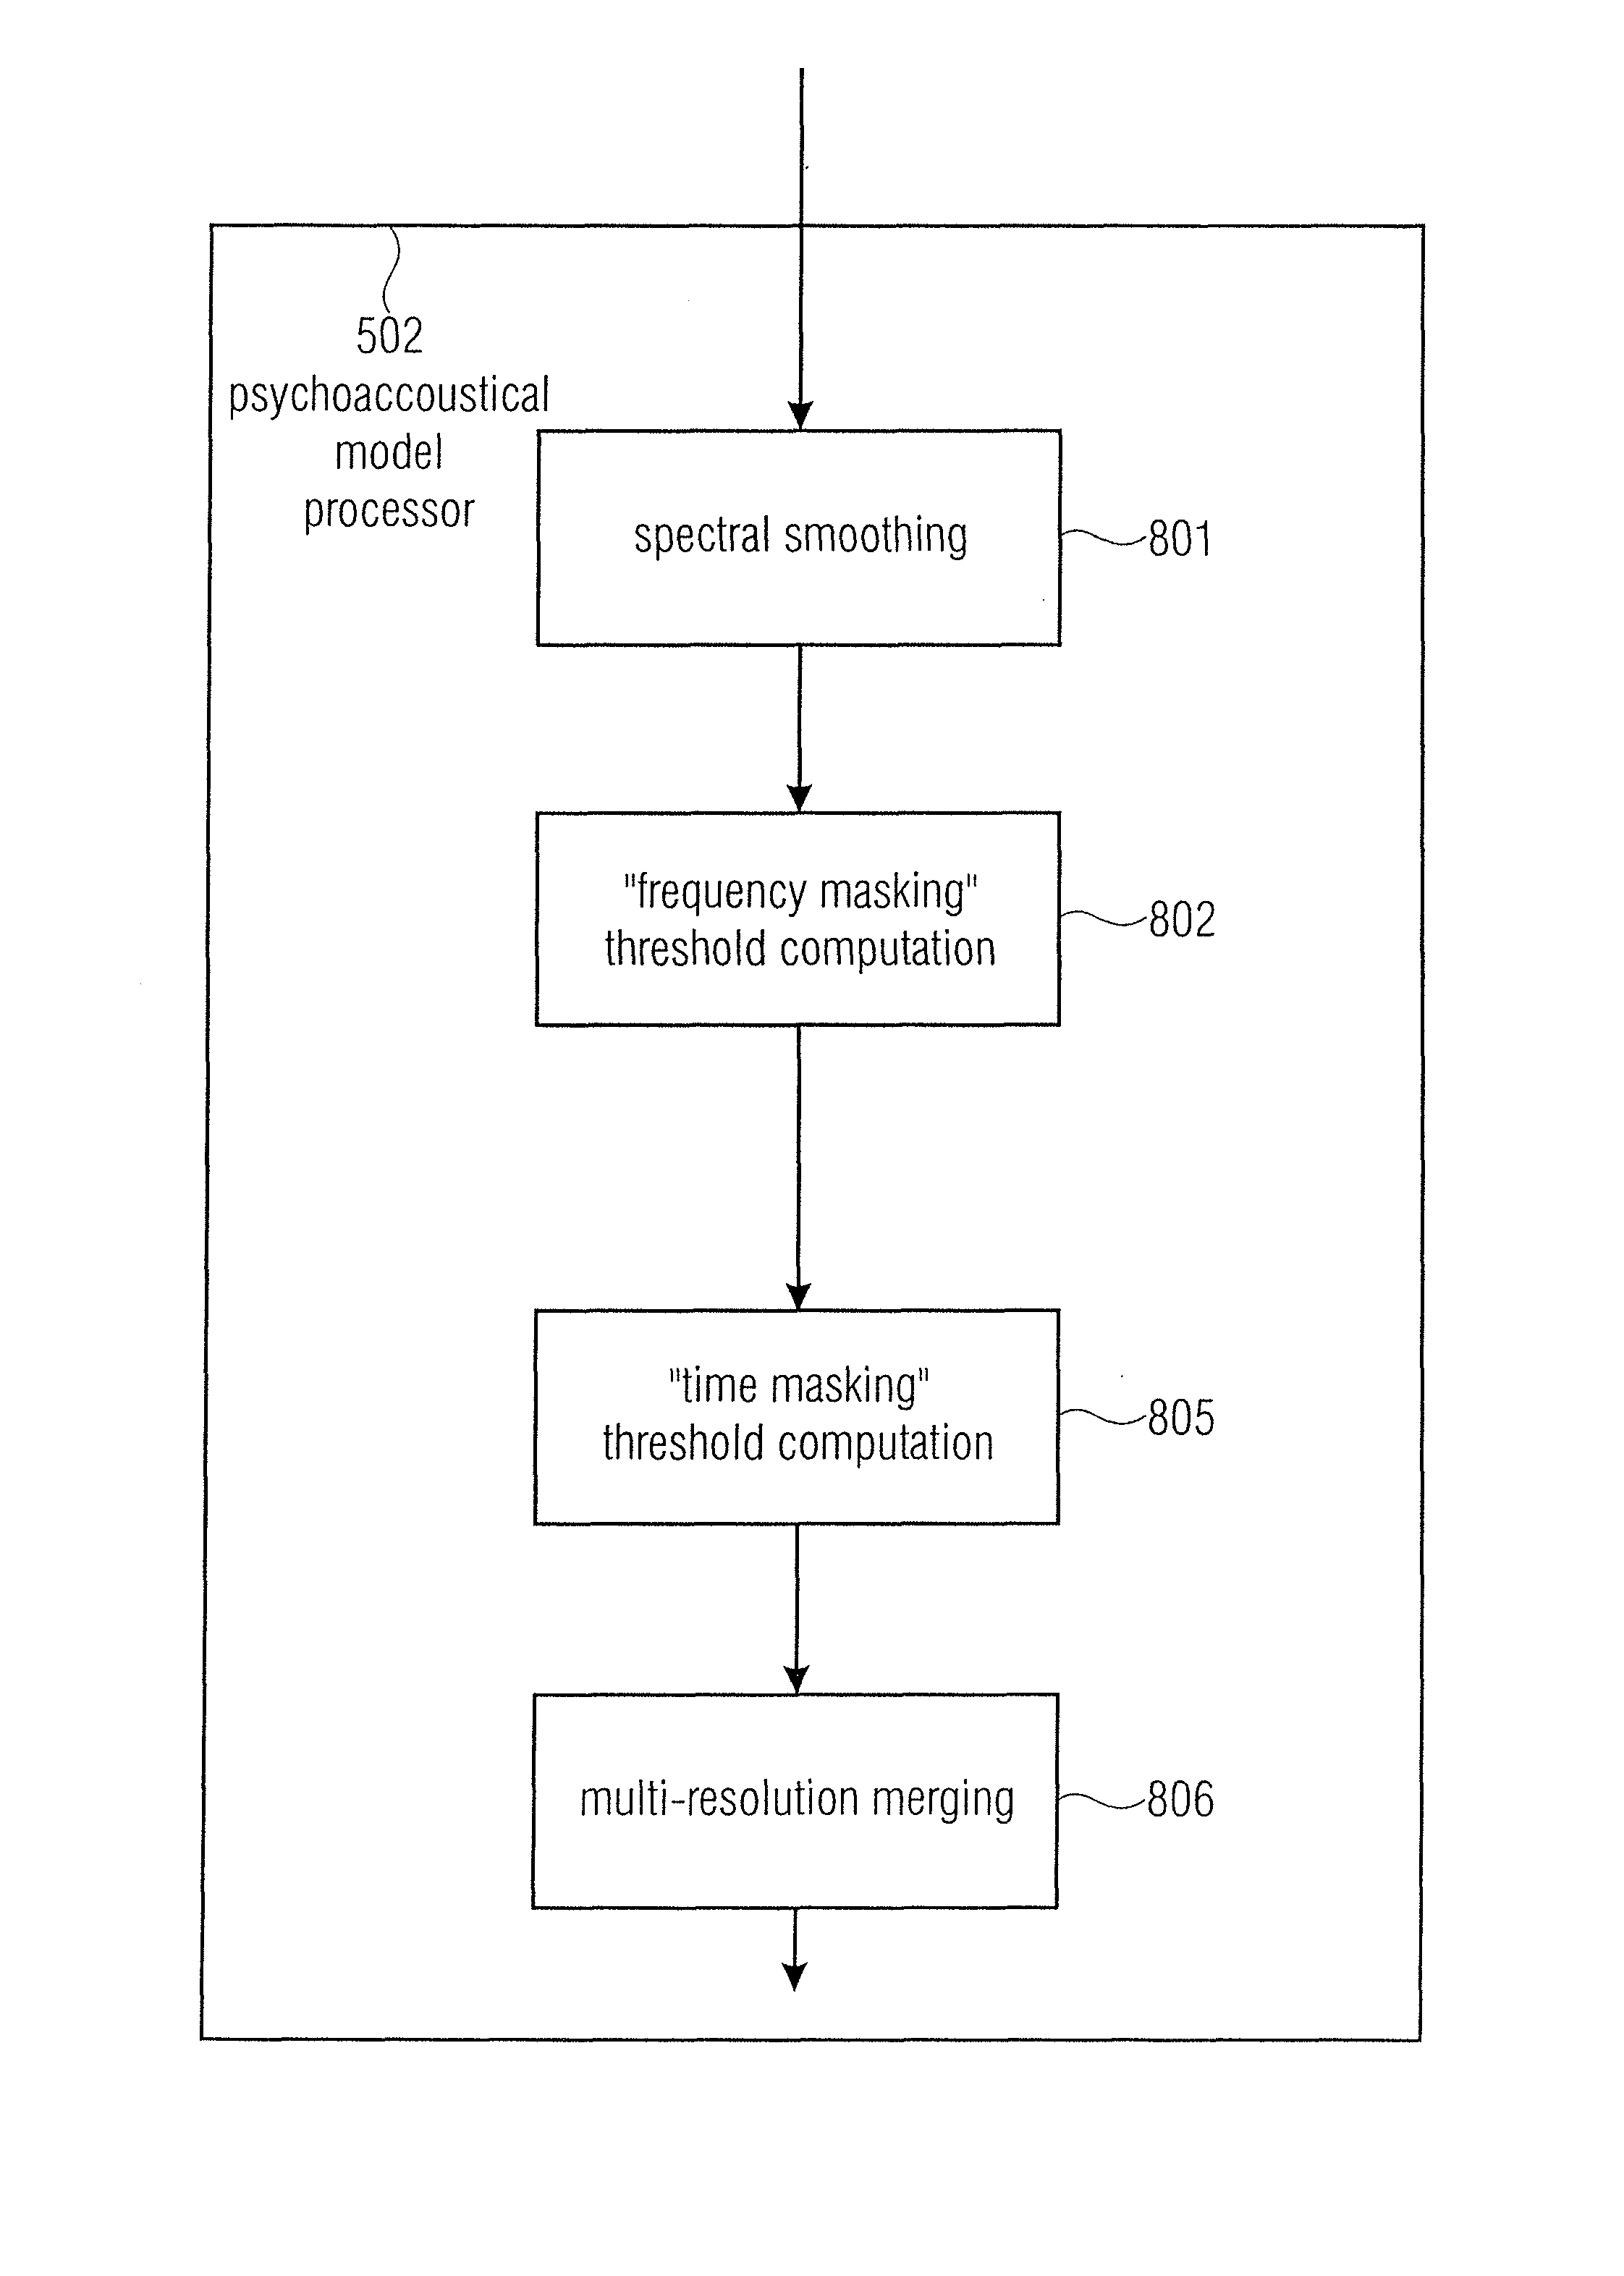 Watermark generator, watermark decoder, method for providing a watermark signal in dependence on binary message data, method for providing binary message data in dependence on a watermarked signal and computer program using a two-dimensional bit spreading